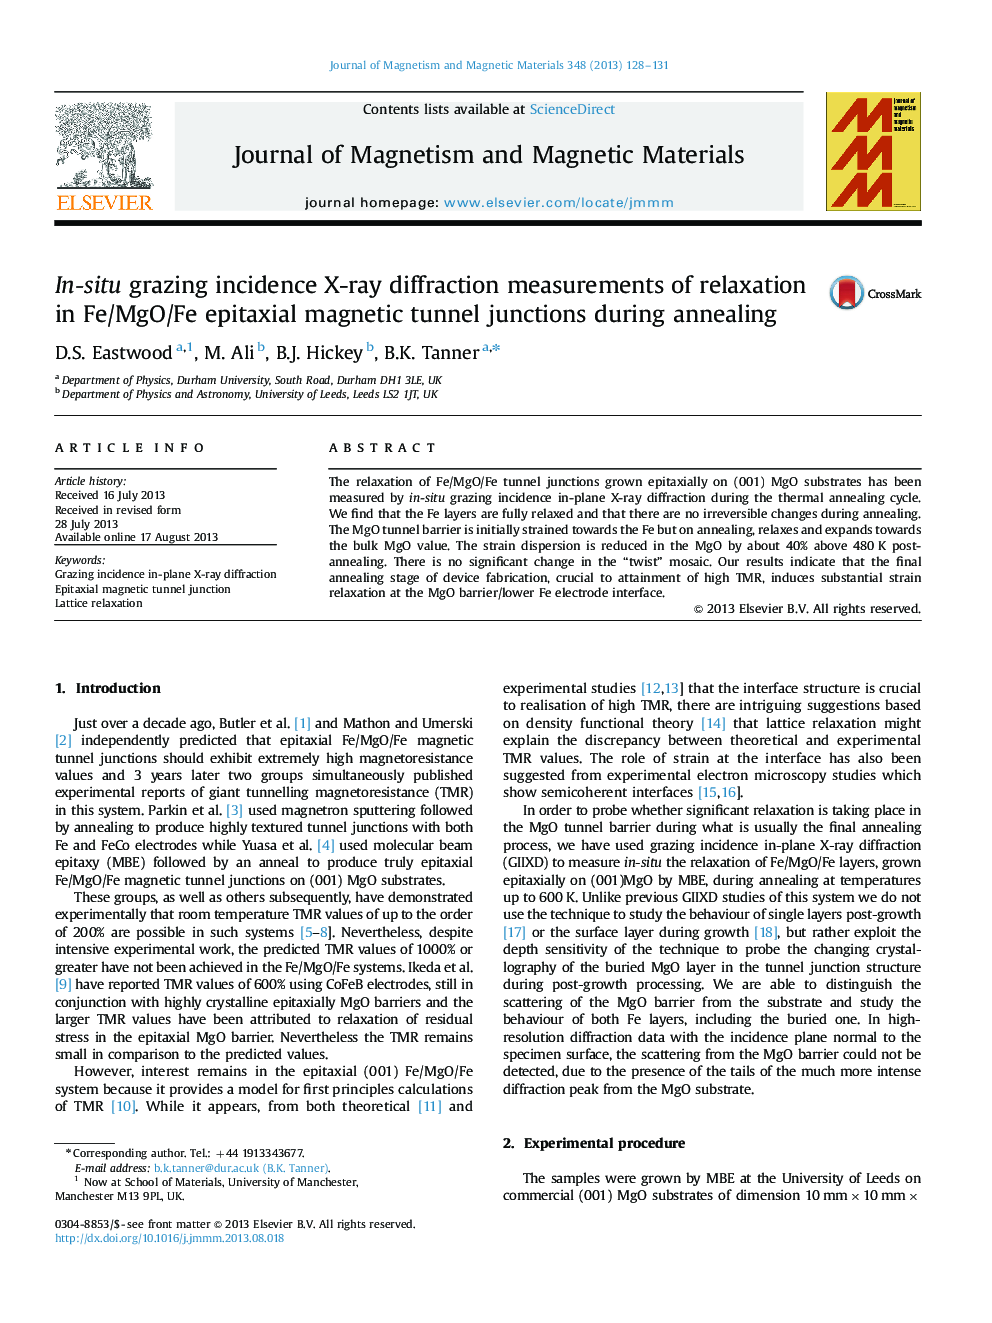 In-situ grazing incidence X-ray diffraction measurements of relaxation in Fe/MgO/Fe epitaxial magnetic tunnel junctions during annealing